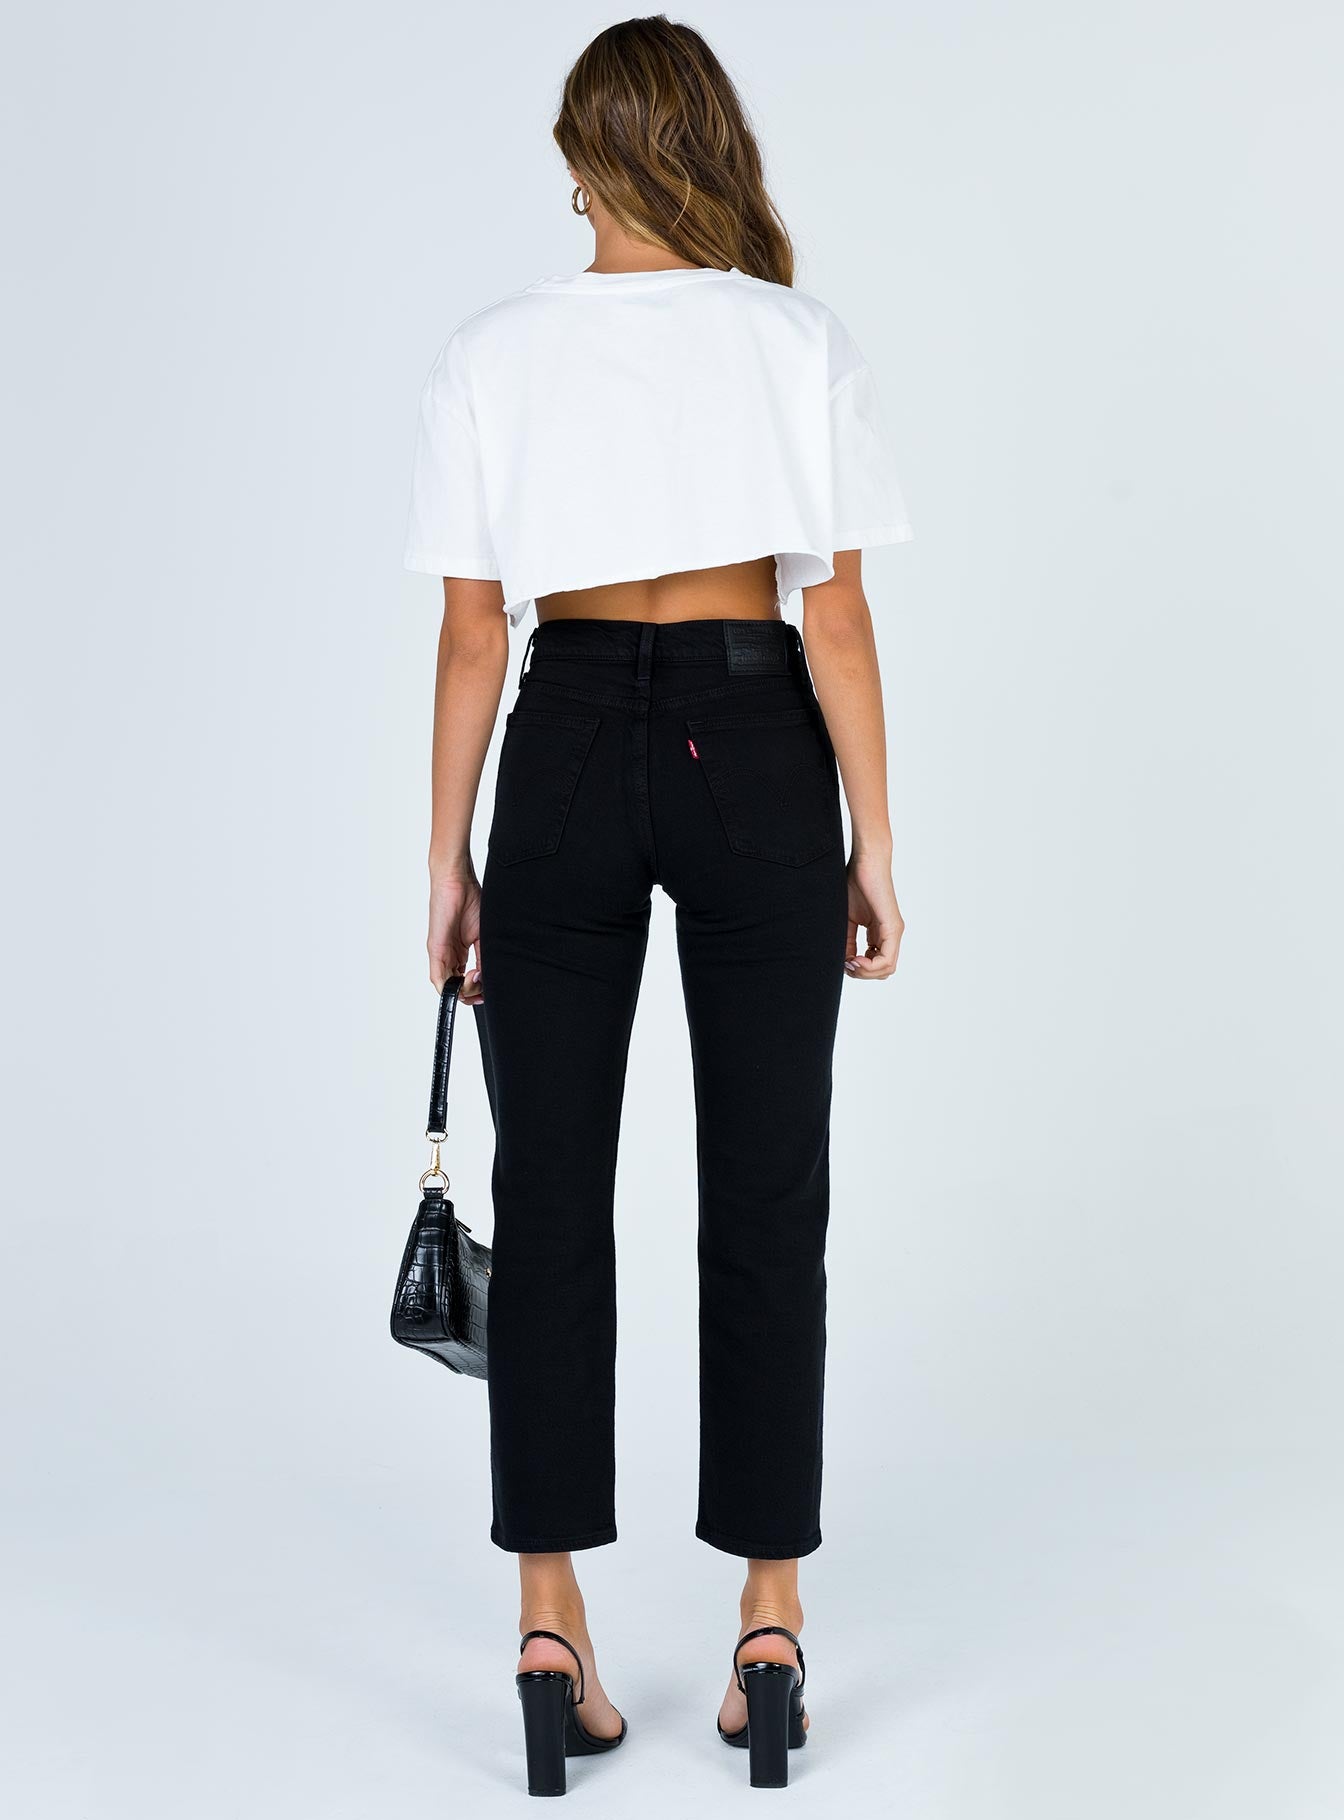 Levi's Wedgie Straight Black Heart Jeans